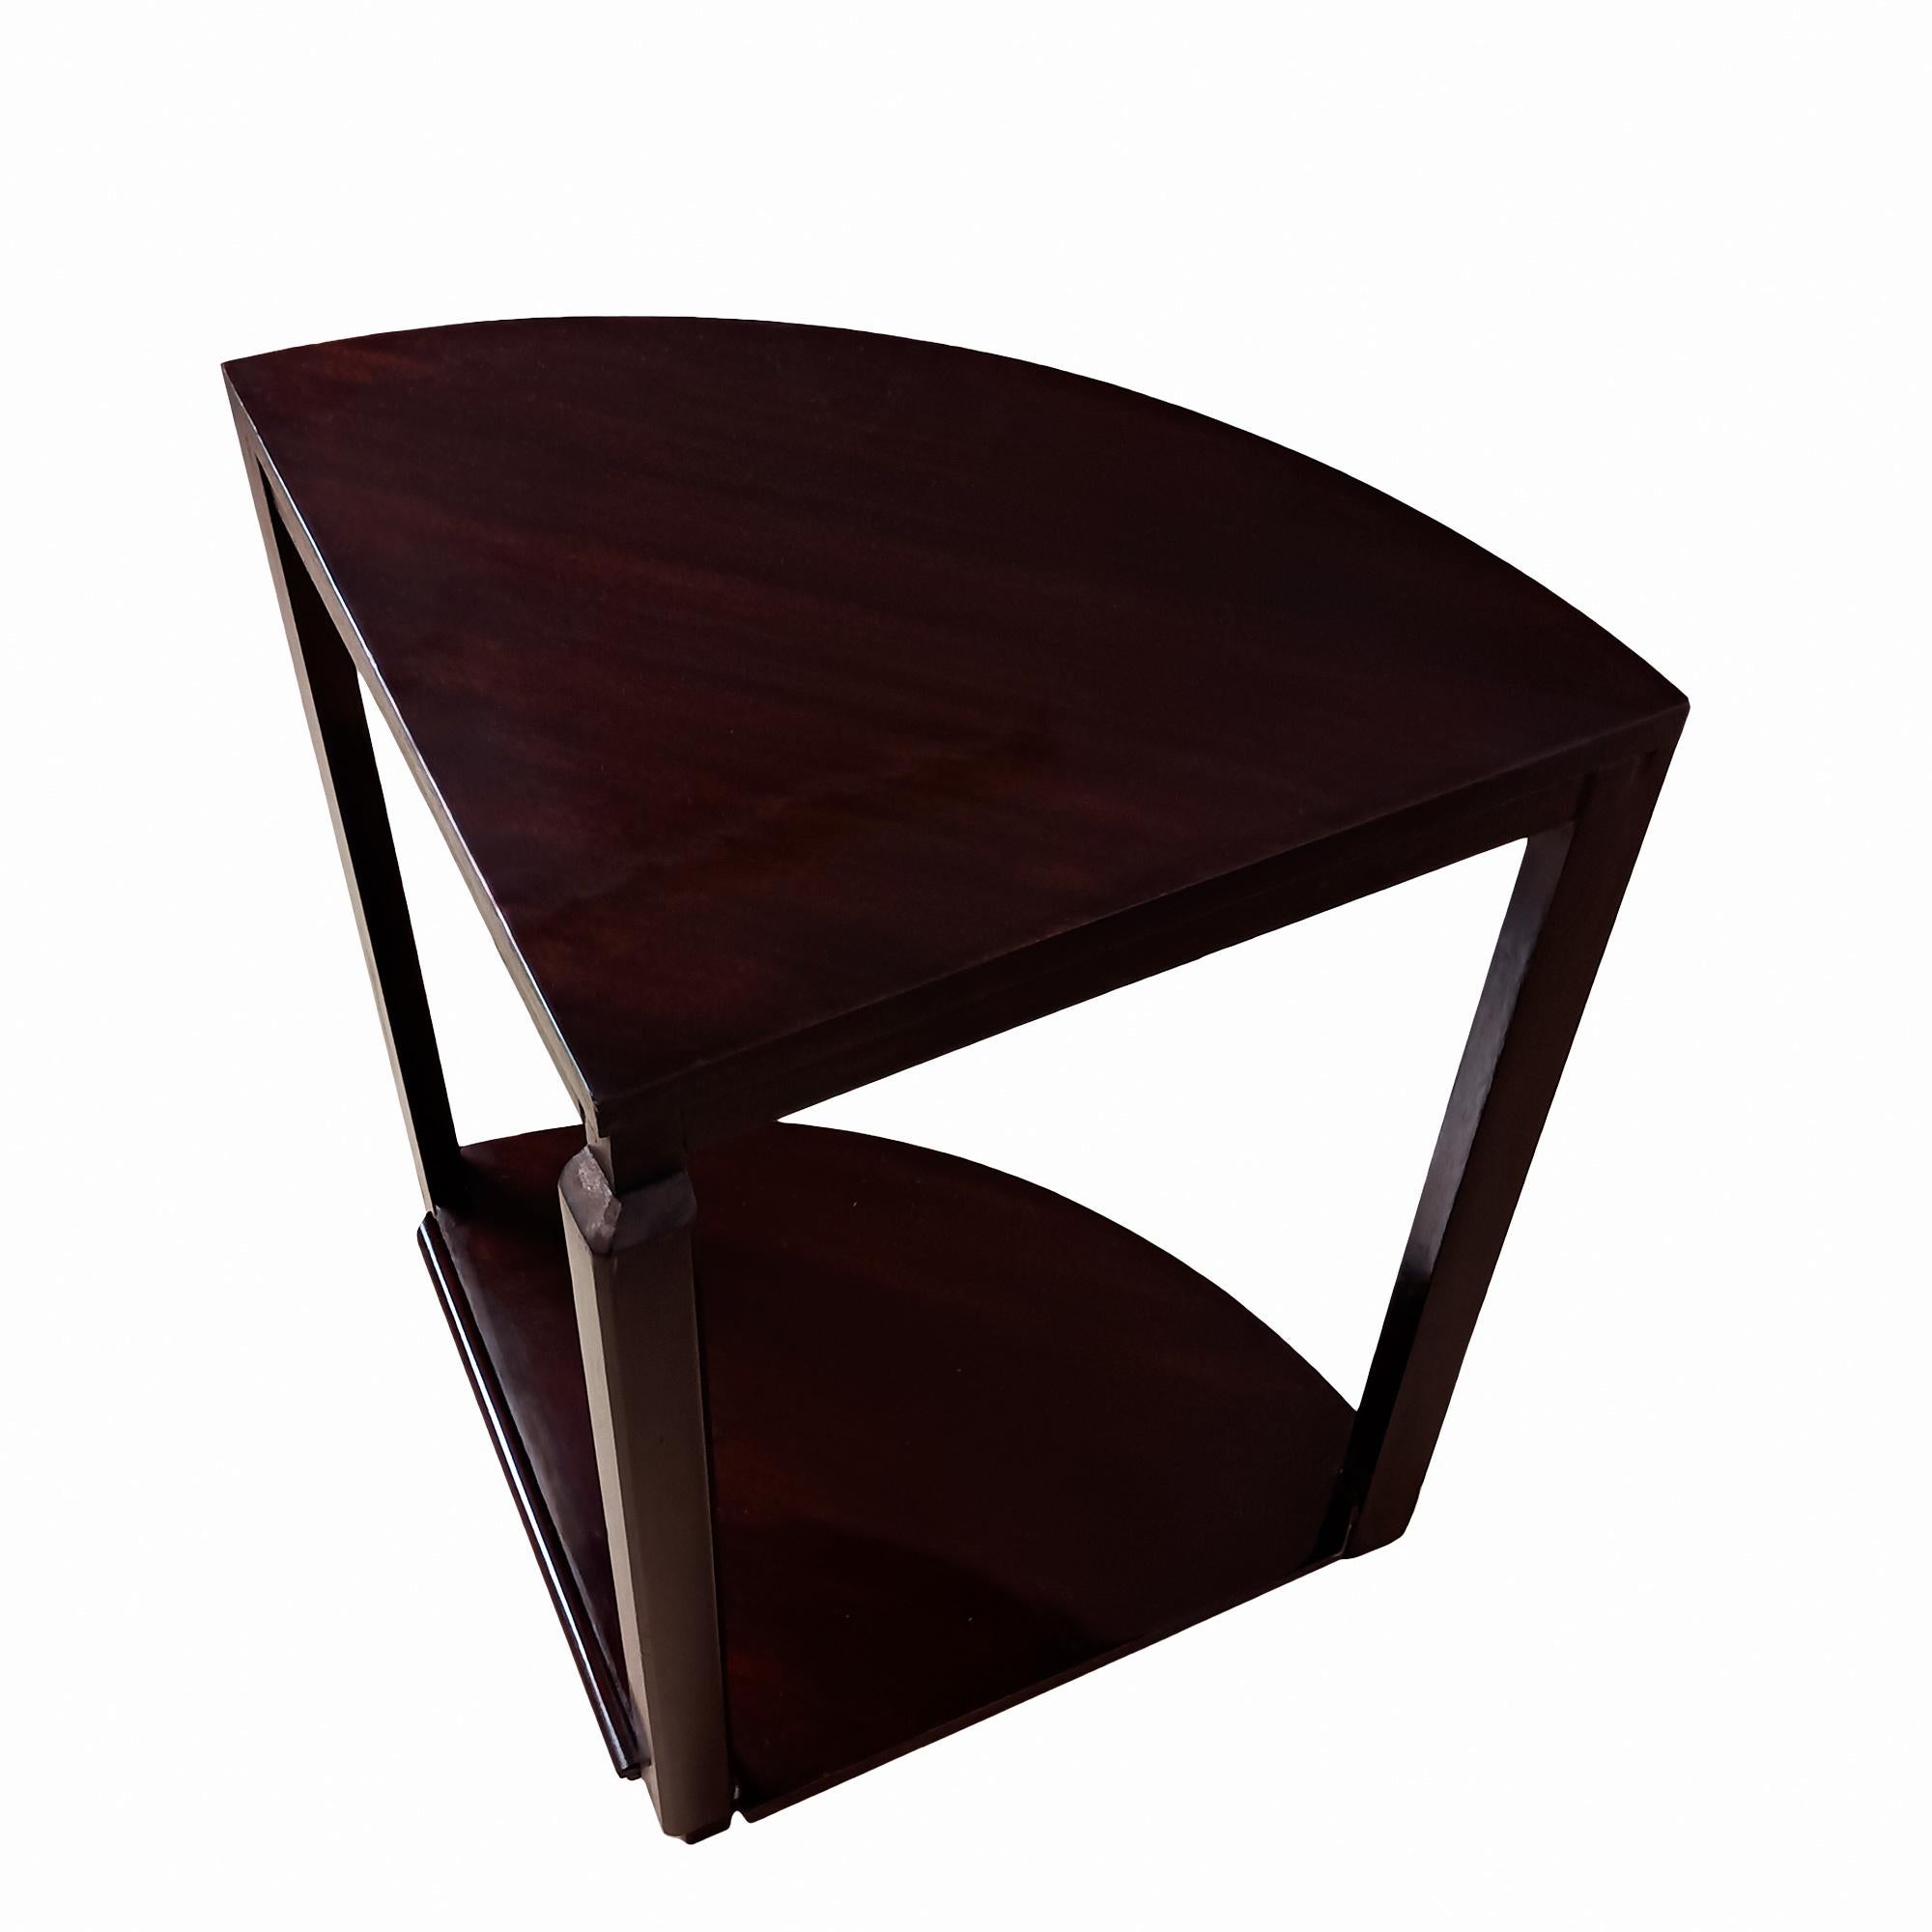 Ebony Large Art Deco Nest of Tables in Solid Mahogany, Belgium, 1925 For Sale